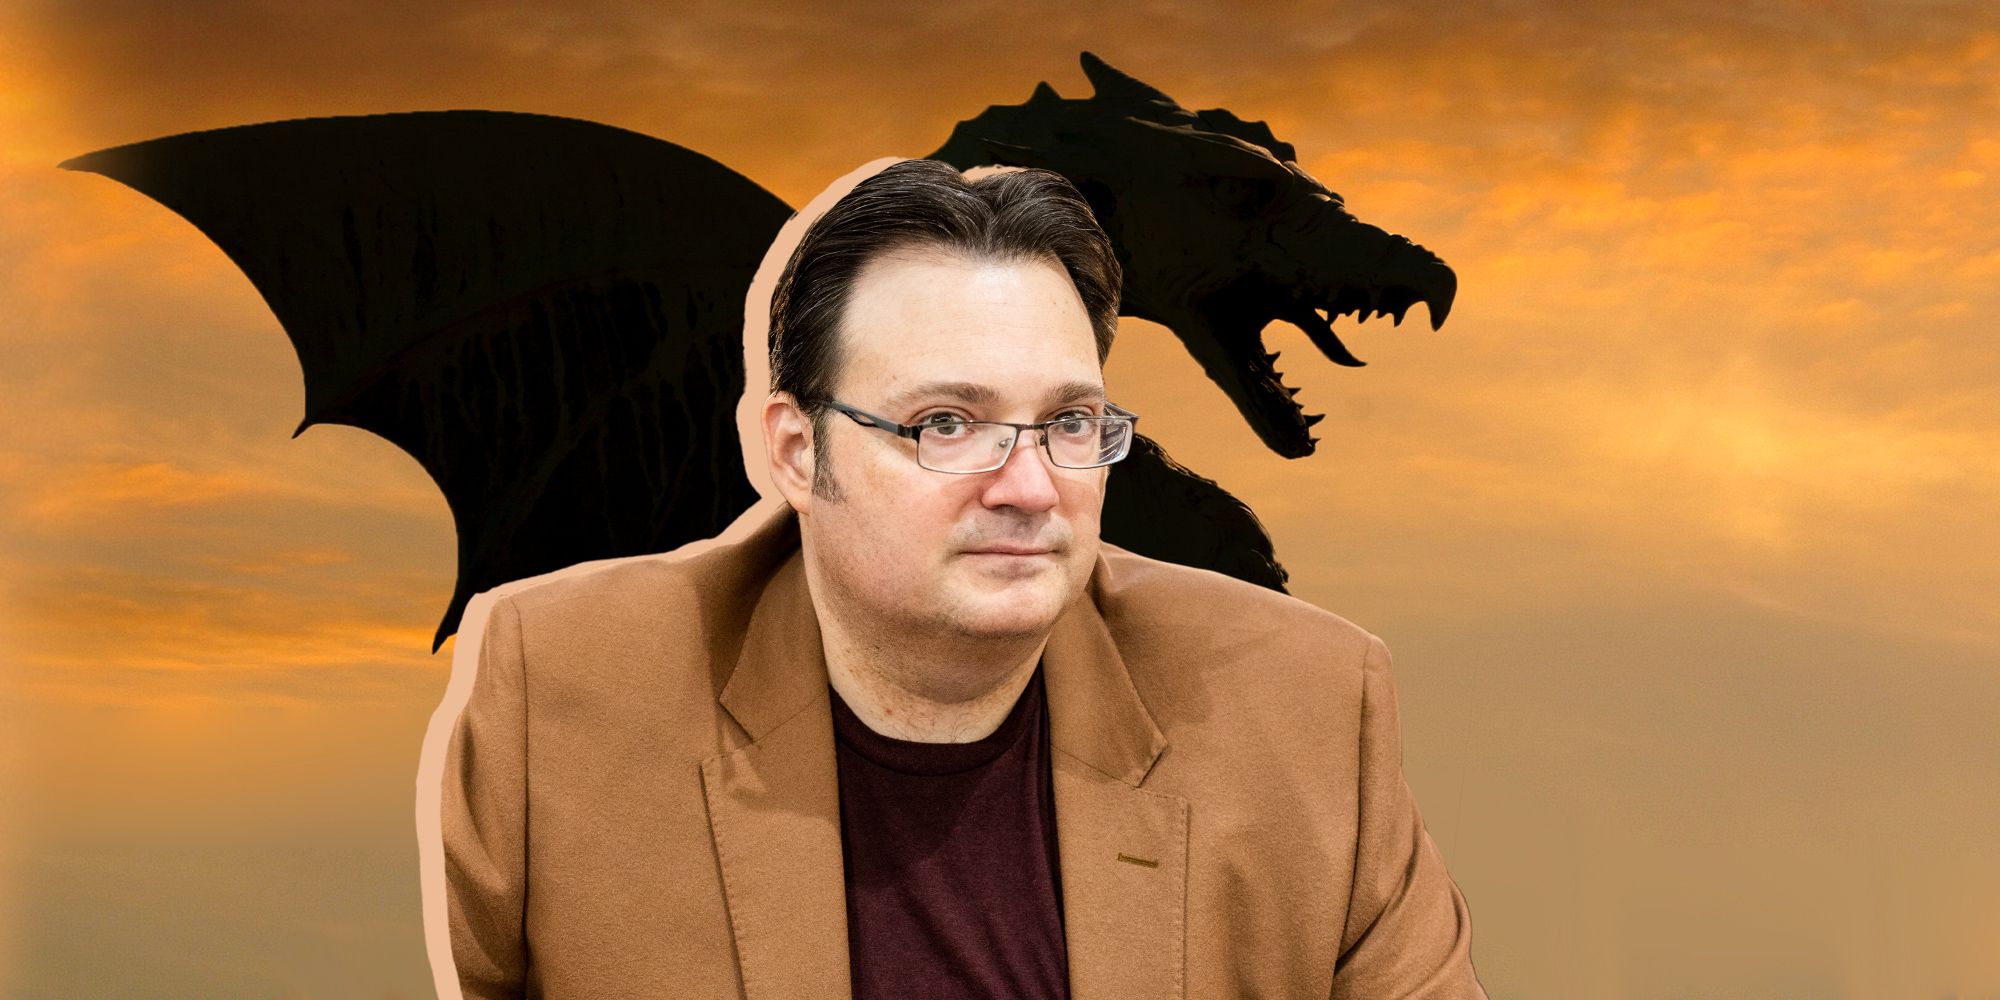 Bandai Namco is Interested in Working with Fantasy Author Brandon Sanderson,  Who Has a Soulsborne Pitch Ready